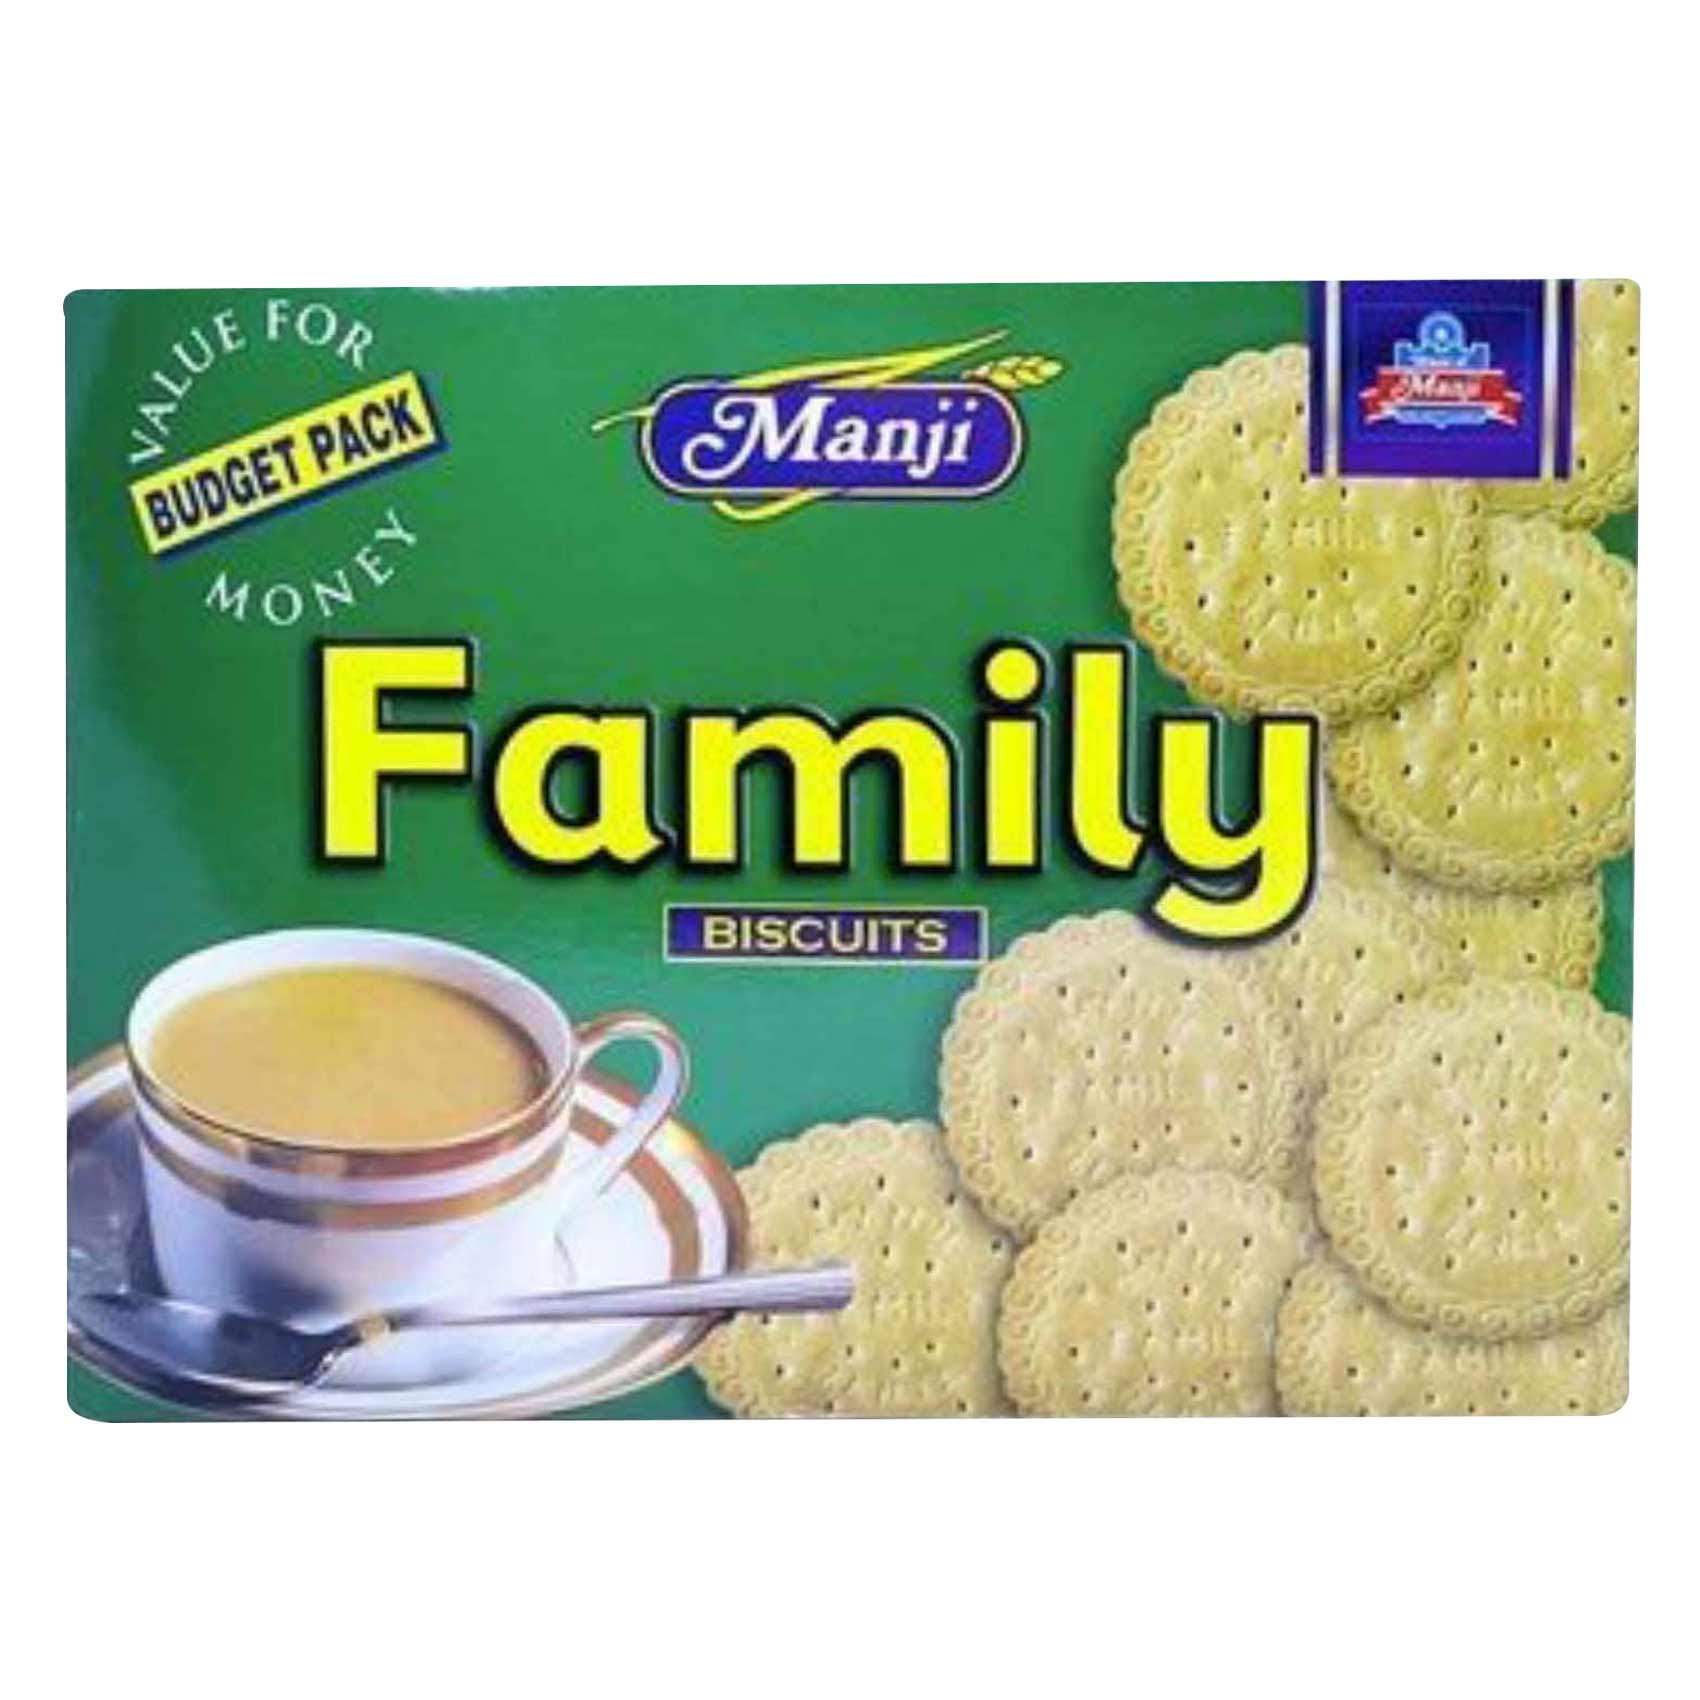 Manji Family Biscuits Budget Pack 1kg